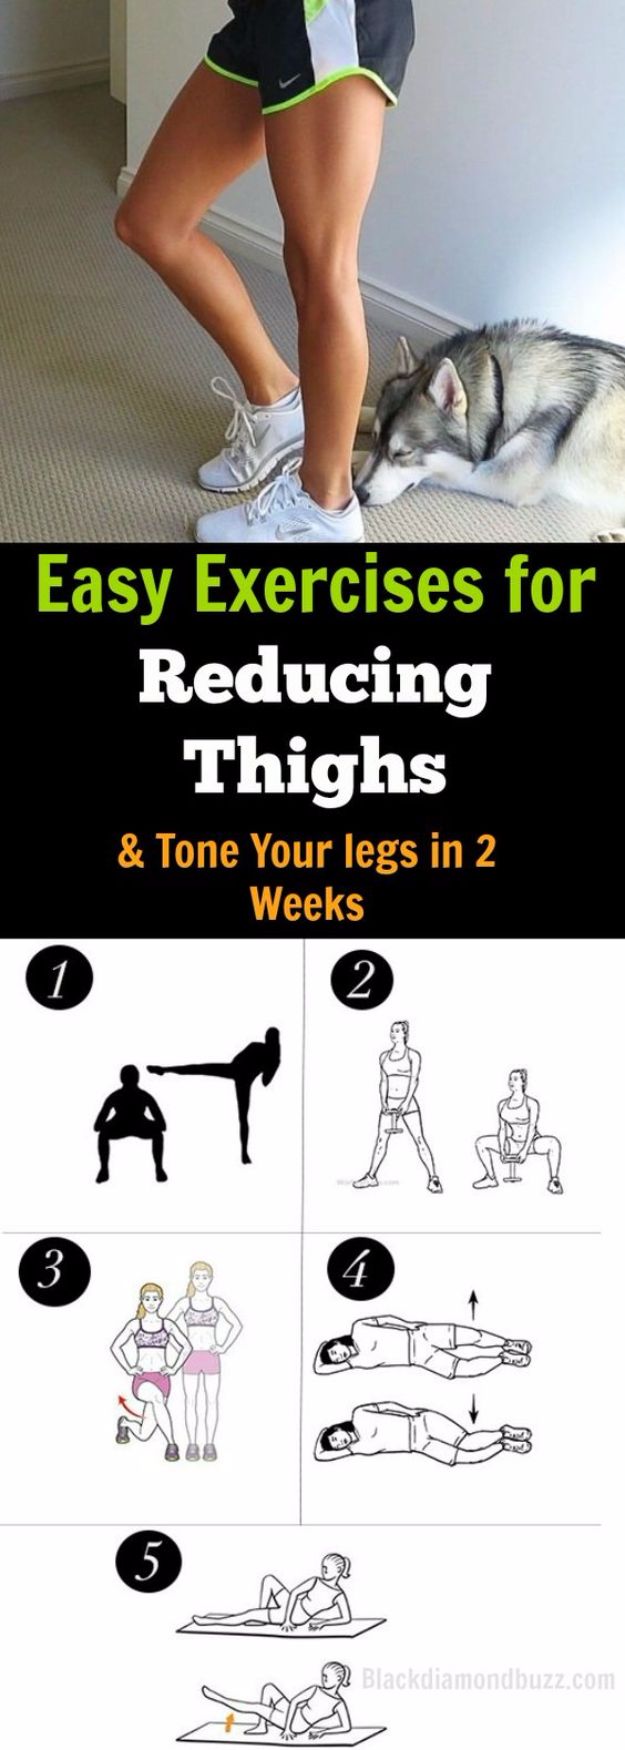 Best Exercises for 2018 - Lose Upper Thigh Fat Fast in 7 Days - Easy At Home Exercises - Quick Exercise Tutorials to Try at Lunch Break - Ways To Get In Shape - Butt, Abs, Arms, Legs, Thighs, Tummy http://diyjoy.com/best-at-home-exercises-2018